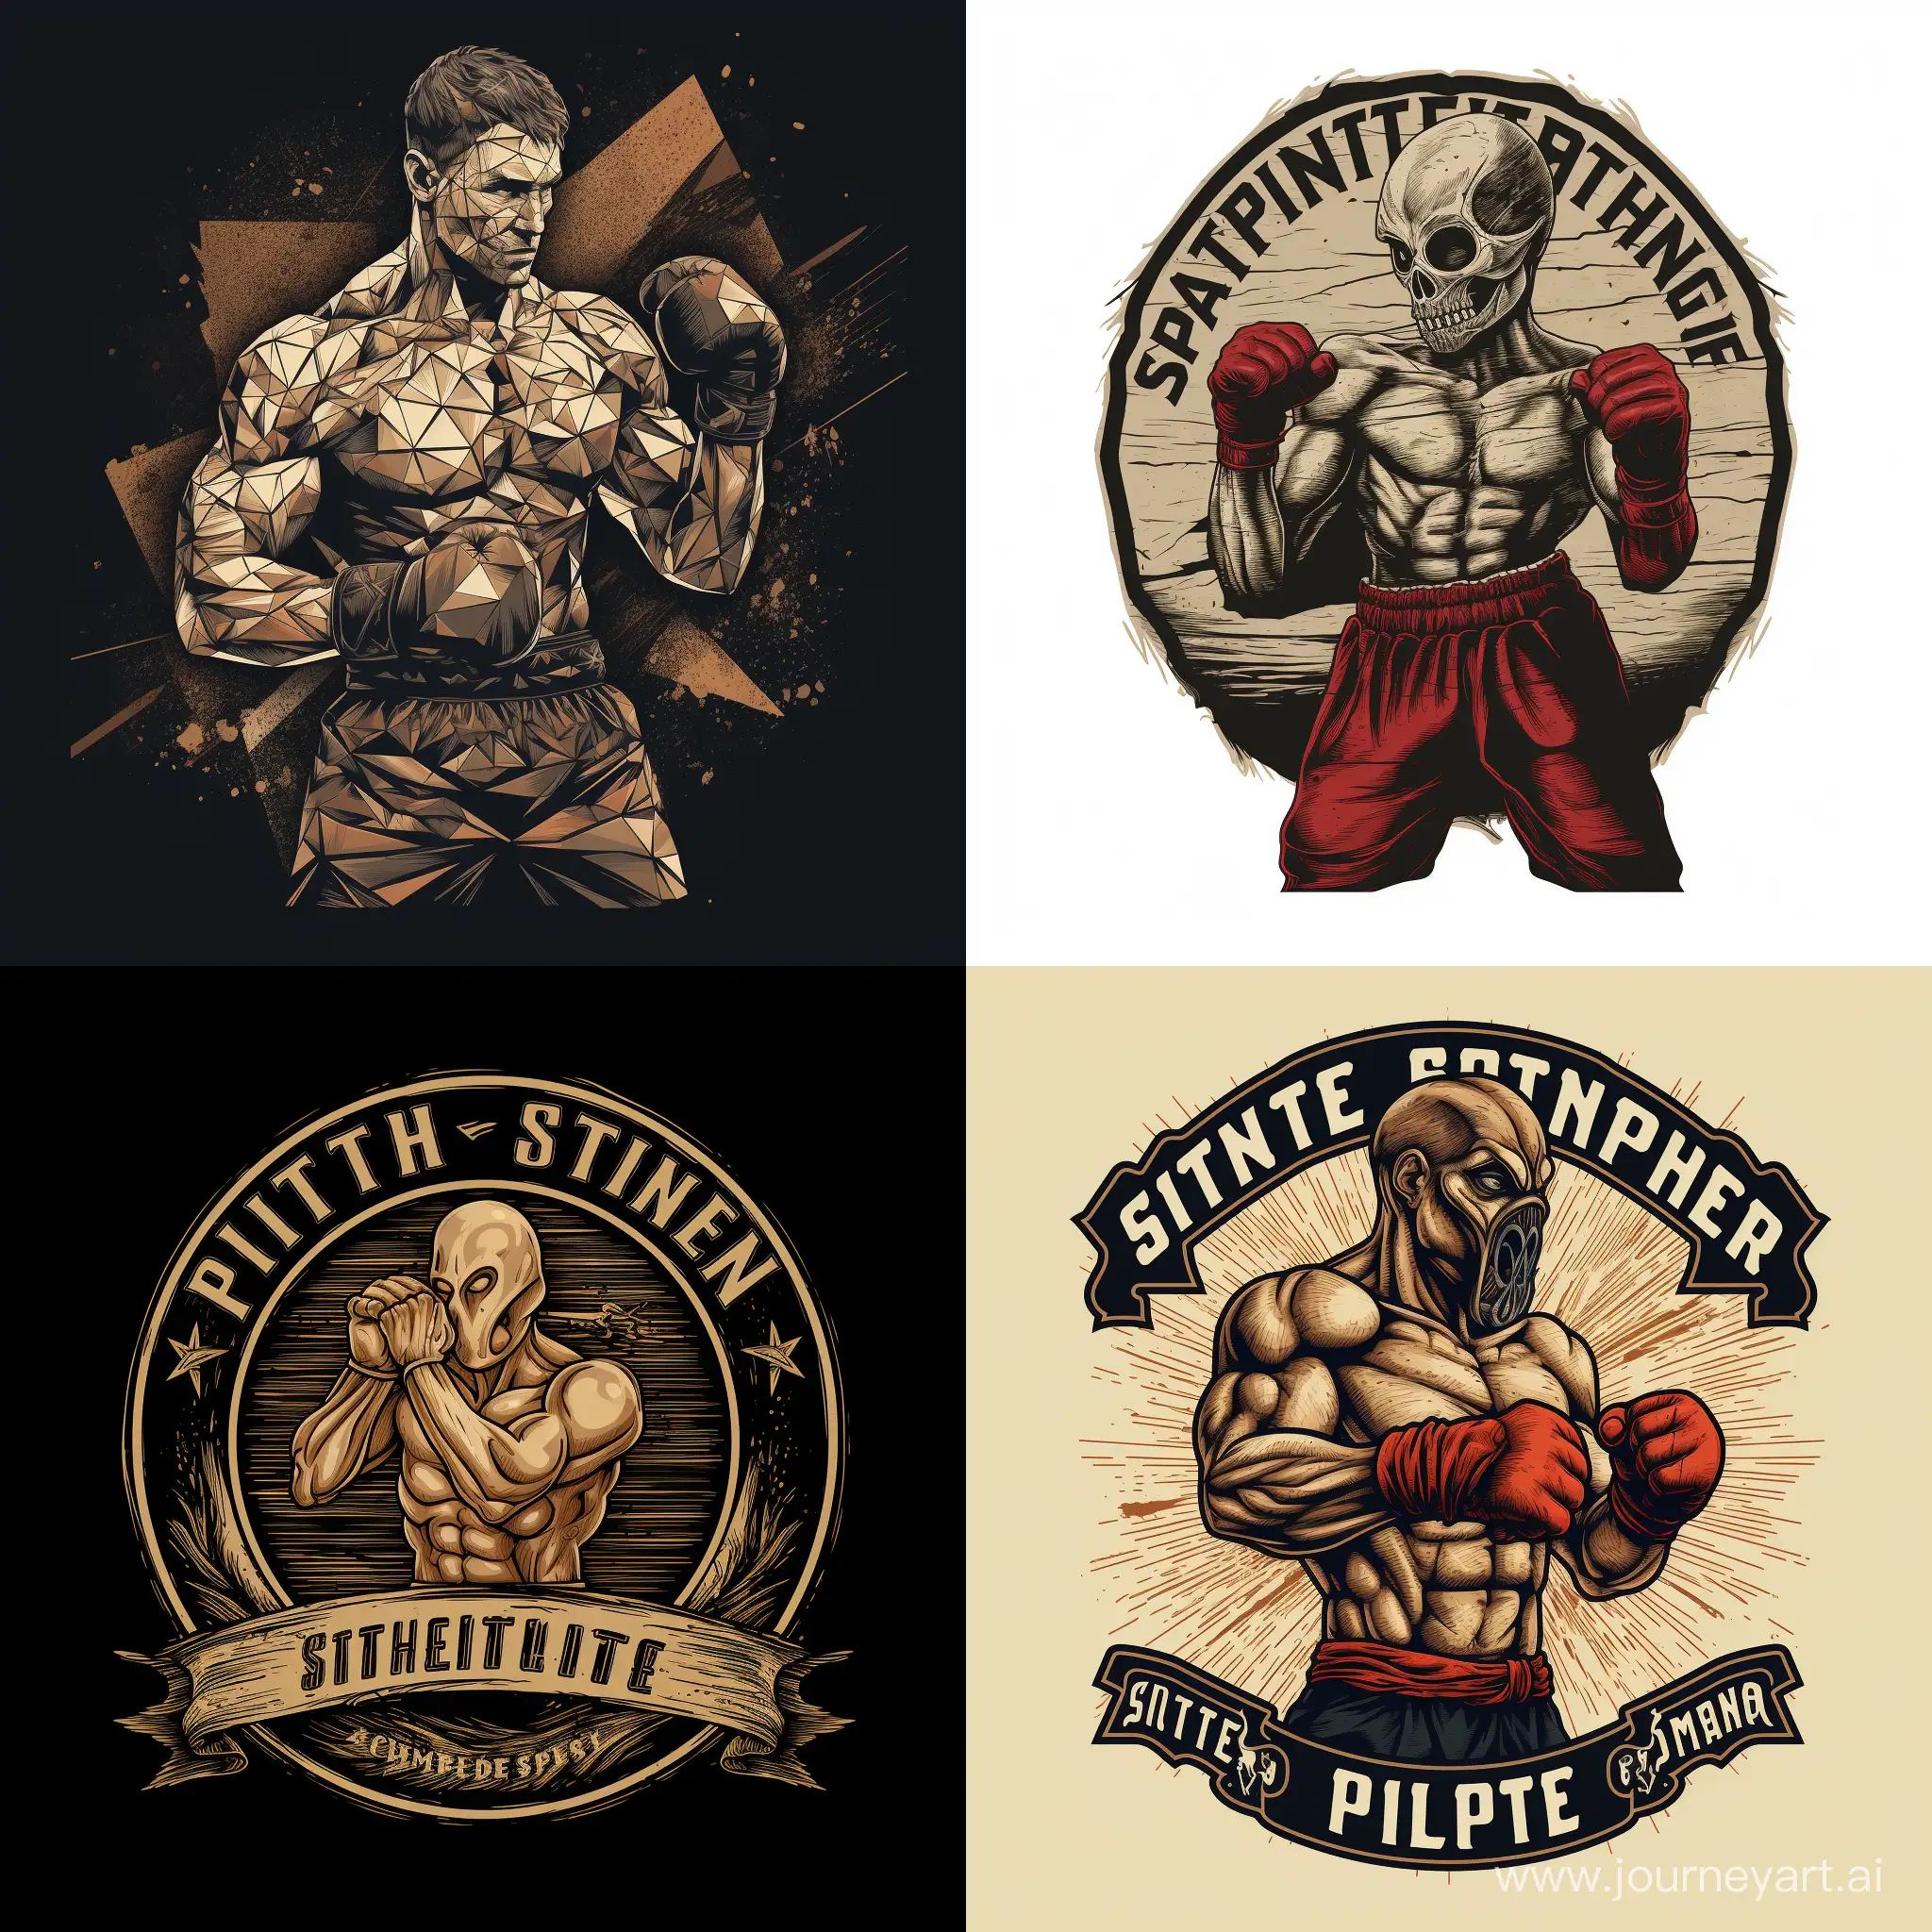 create a logo for an antifa boxing gym called "splinter". Use a high detailed and artistic depection of a wooden splinter